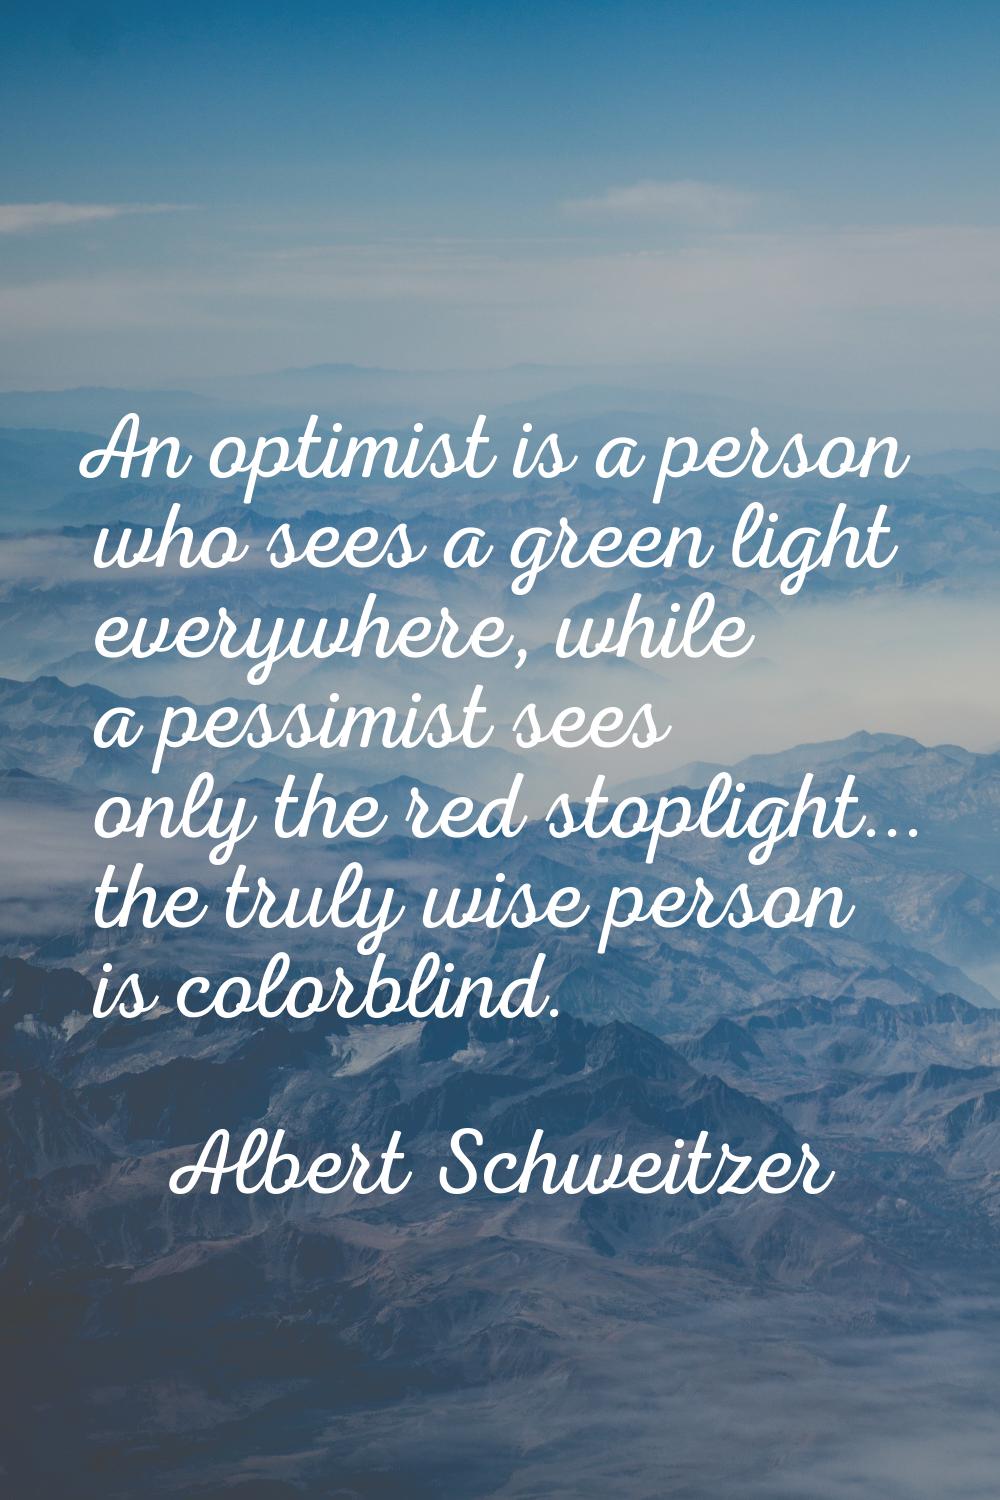 An optimist is a person who sees a green light everywhere, while a pessimist sees only the red stop